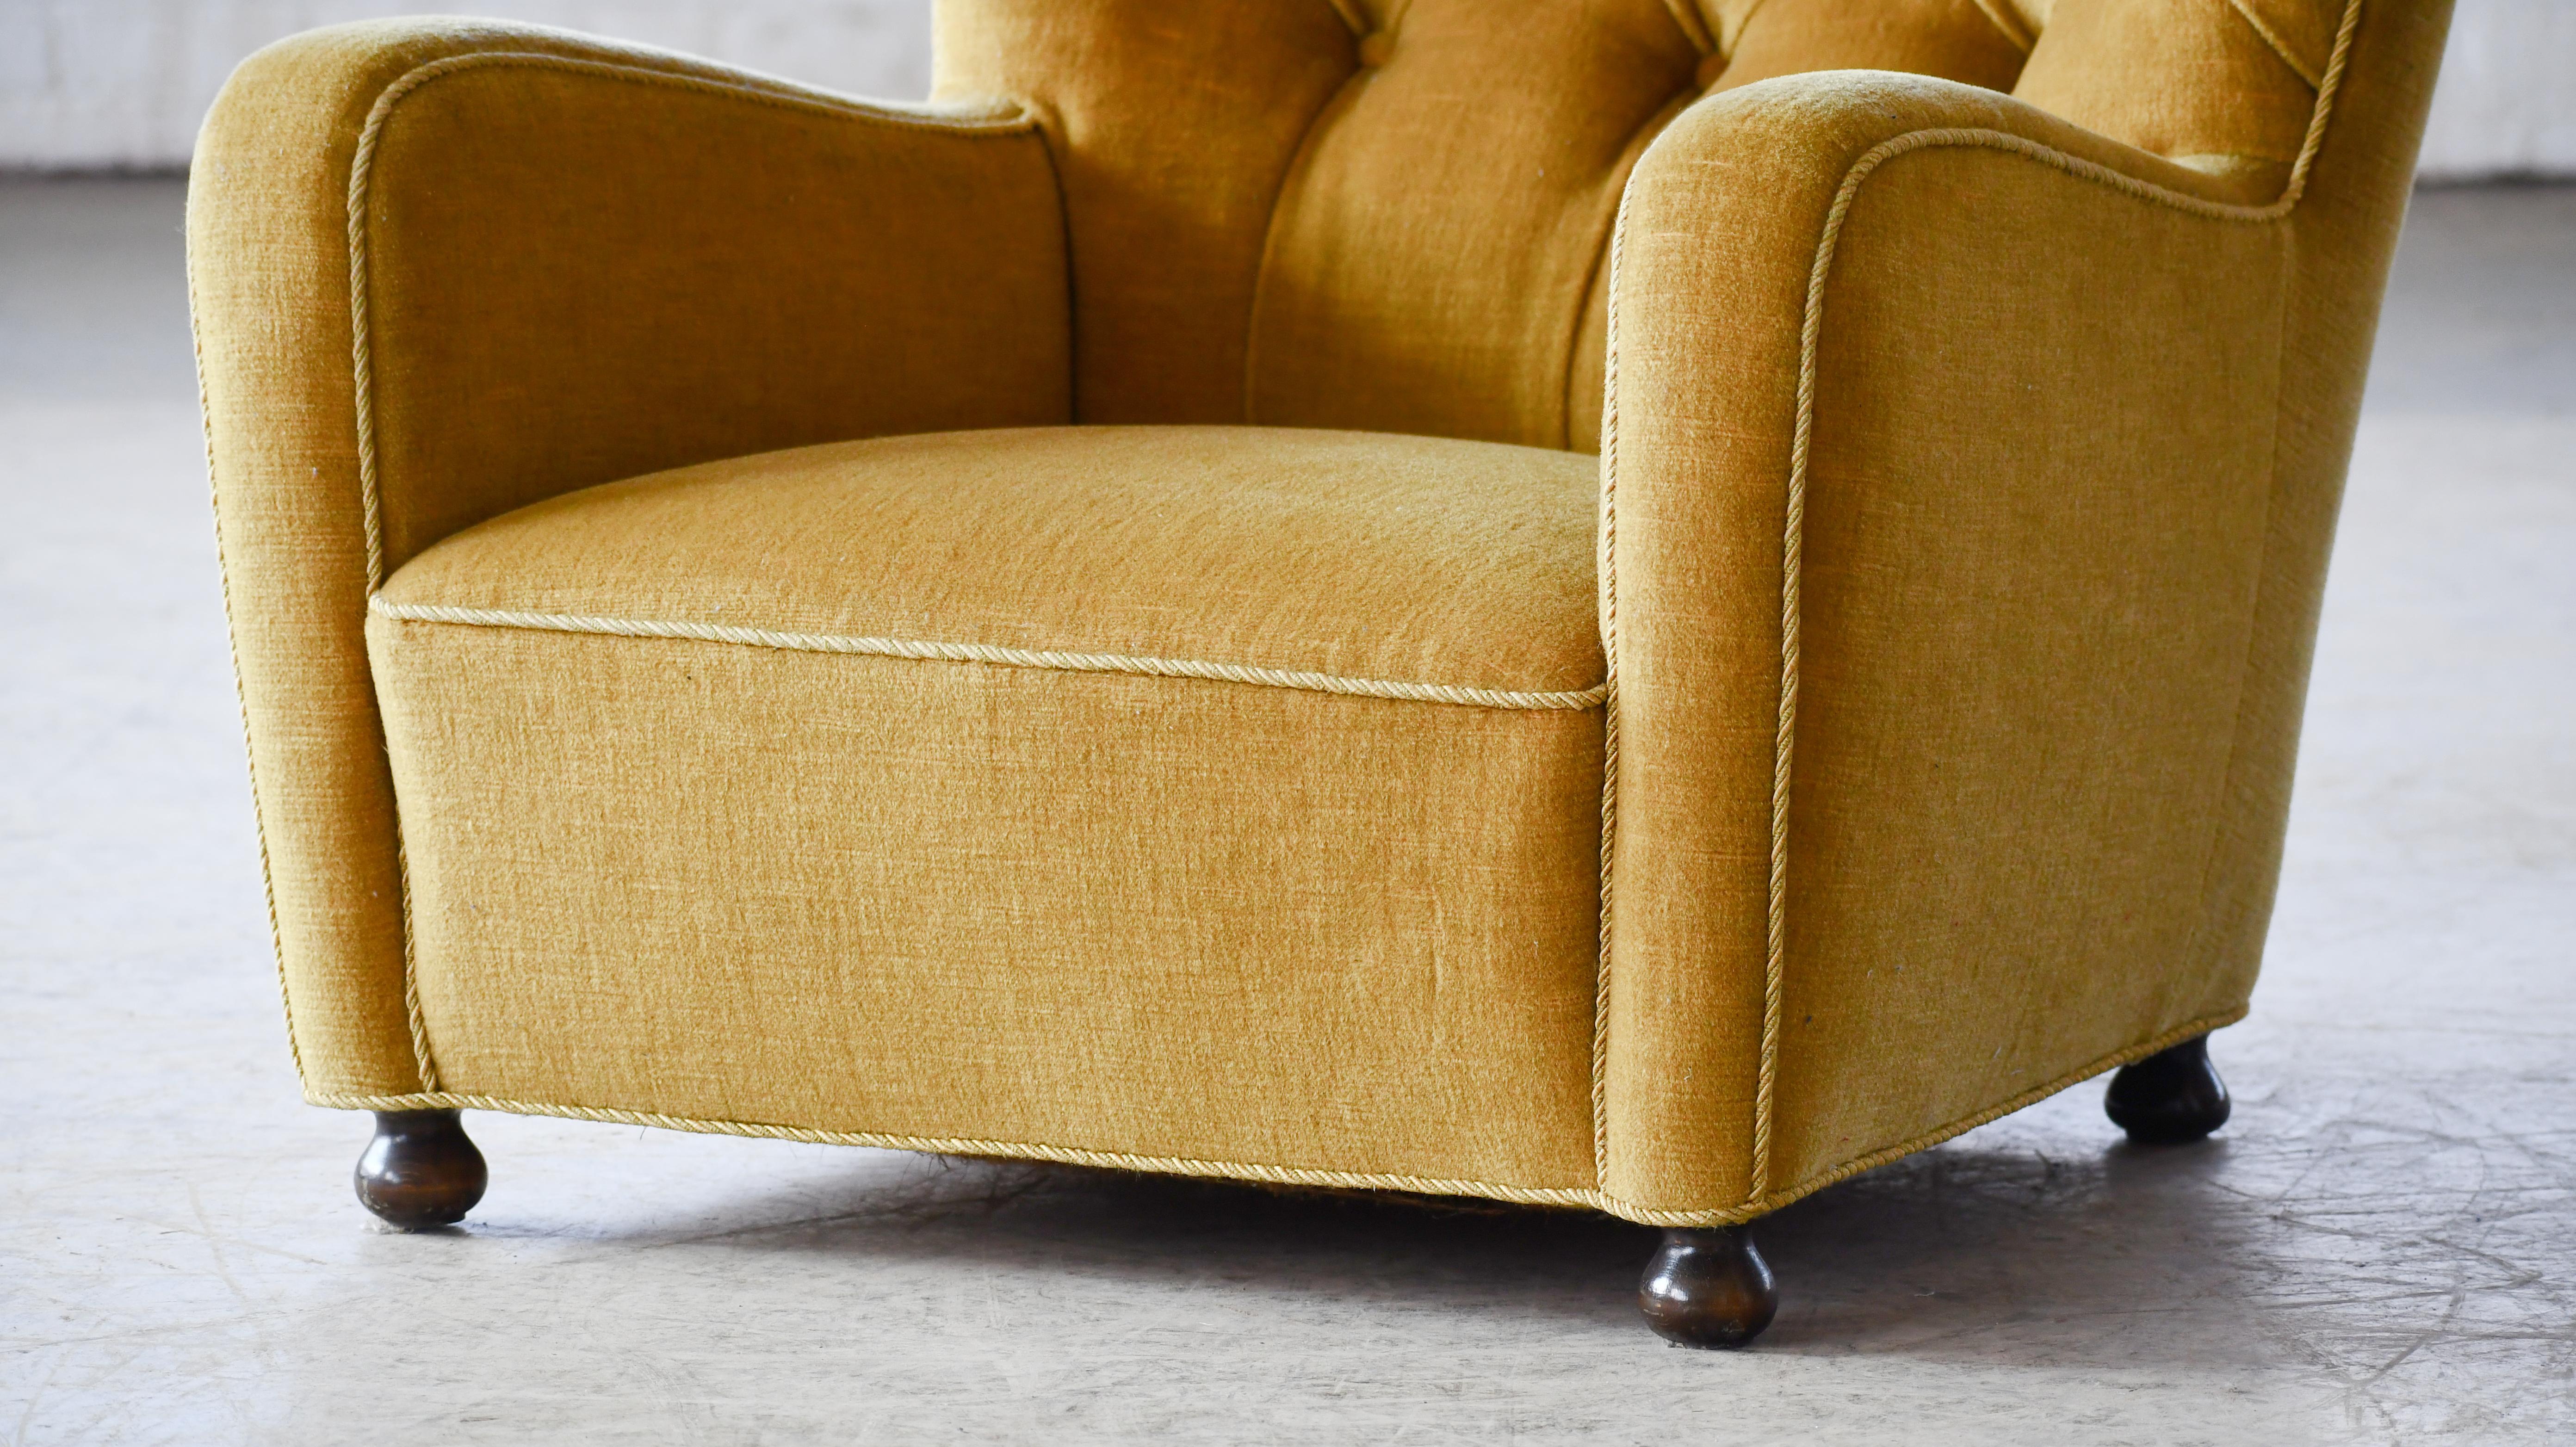 Mid-20th Century 1930-40s Danish Art Deco or Early Midcentury Lounge Chair in Golden Mohair